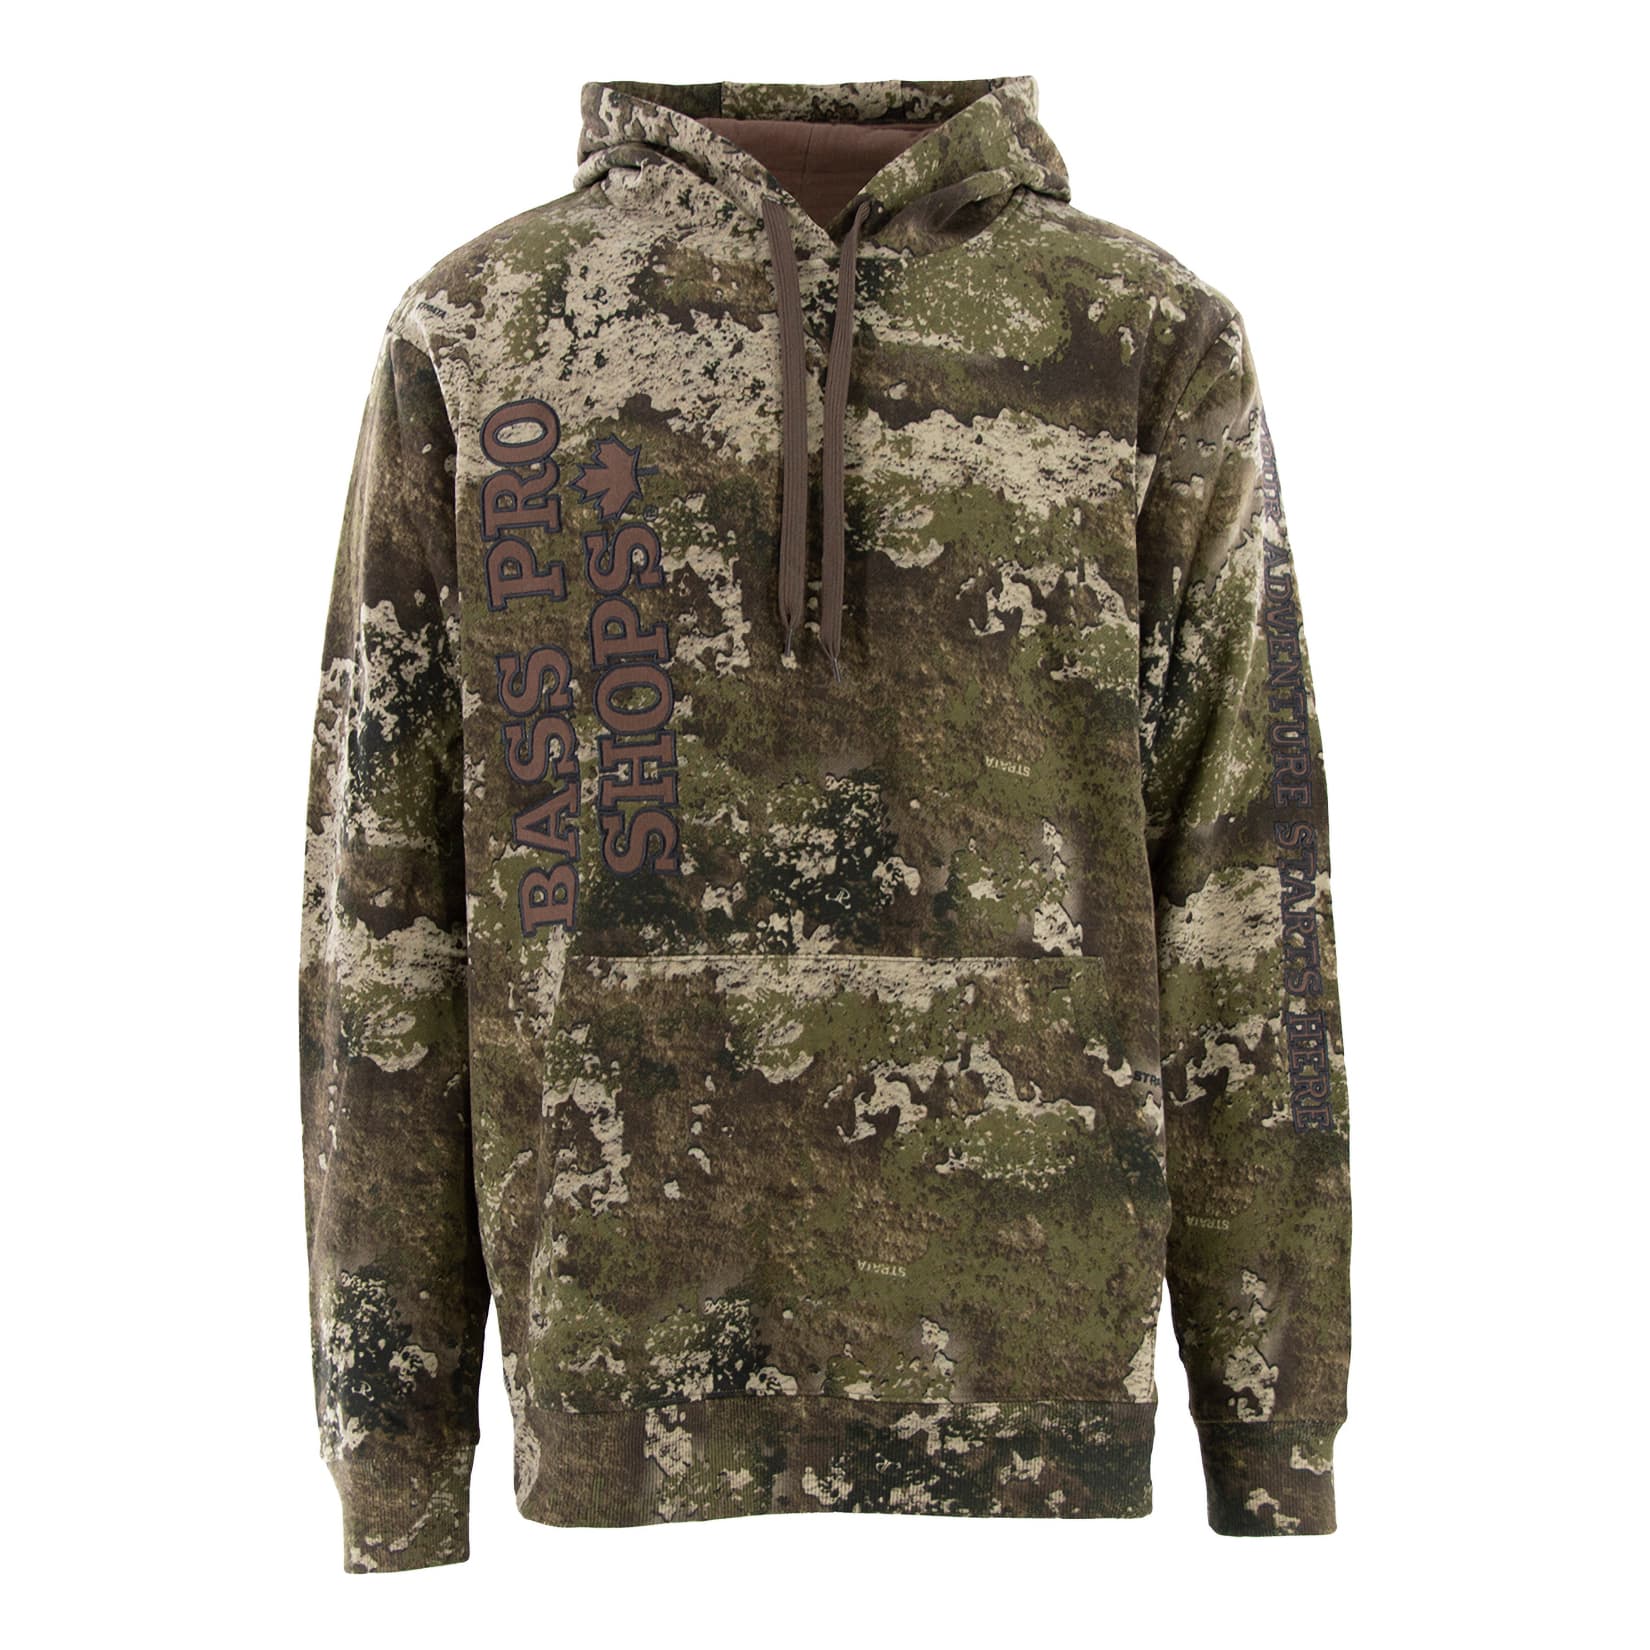 Cabela's or Bass Pro Shops Hoodies for the Family